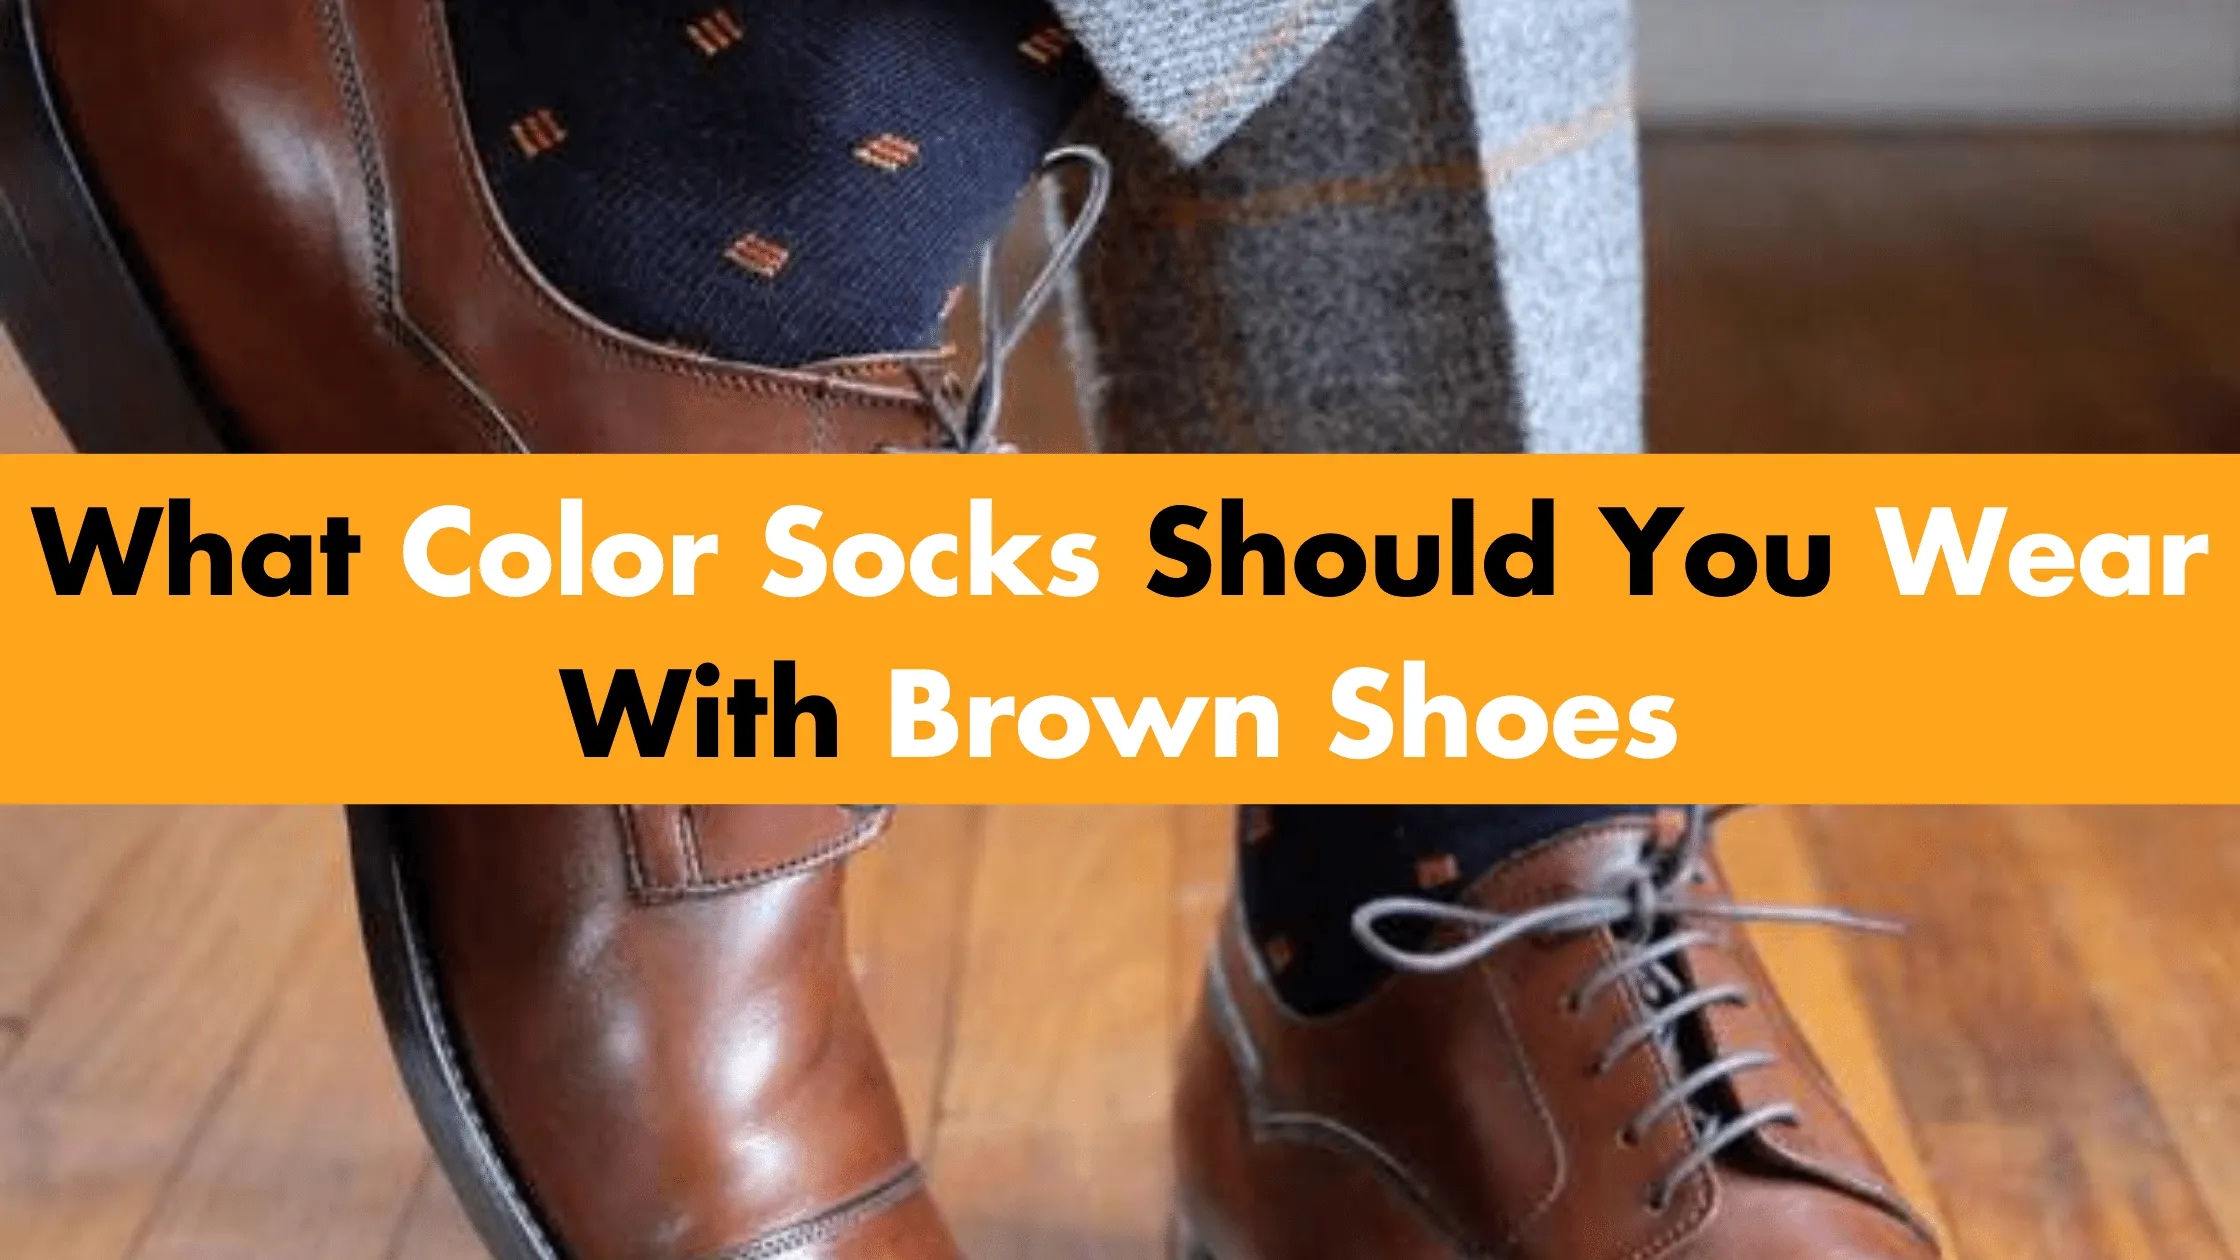 What Color Socks Should You Wear With Brown Shoes